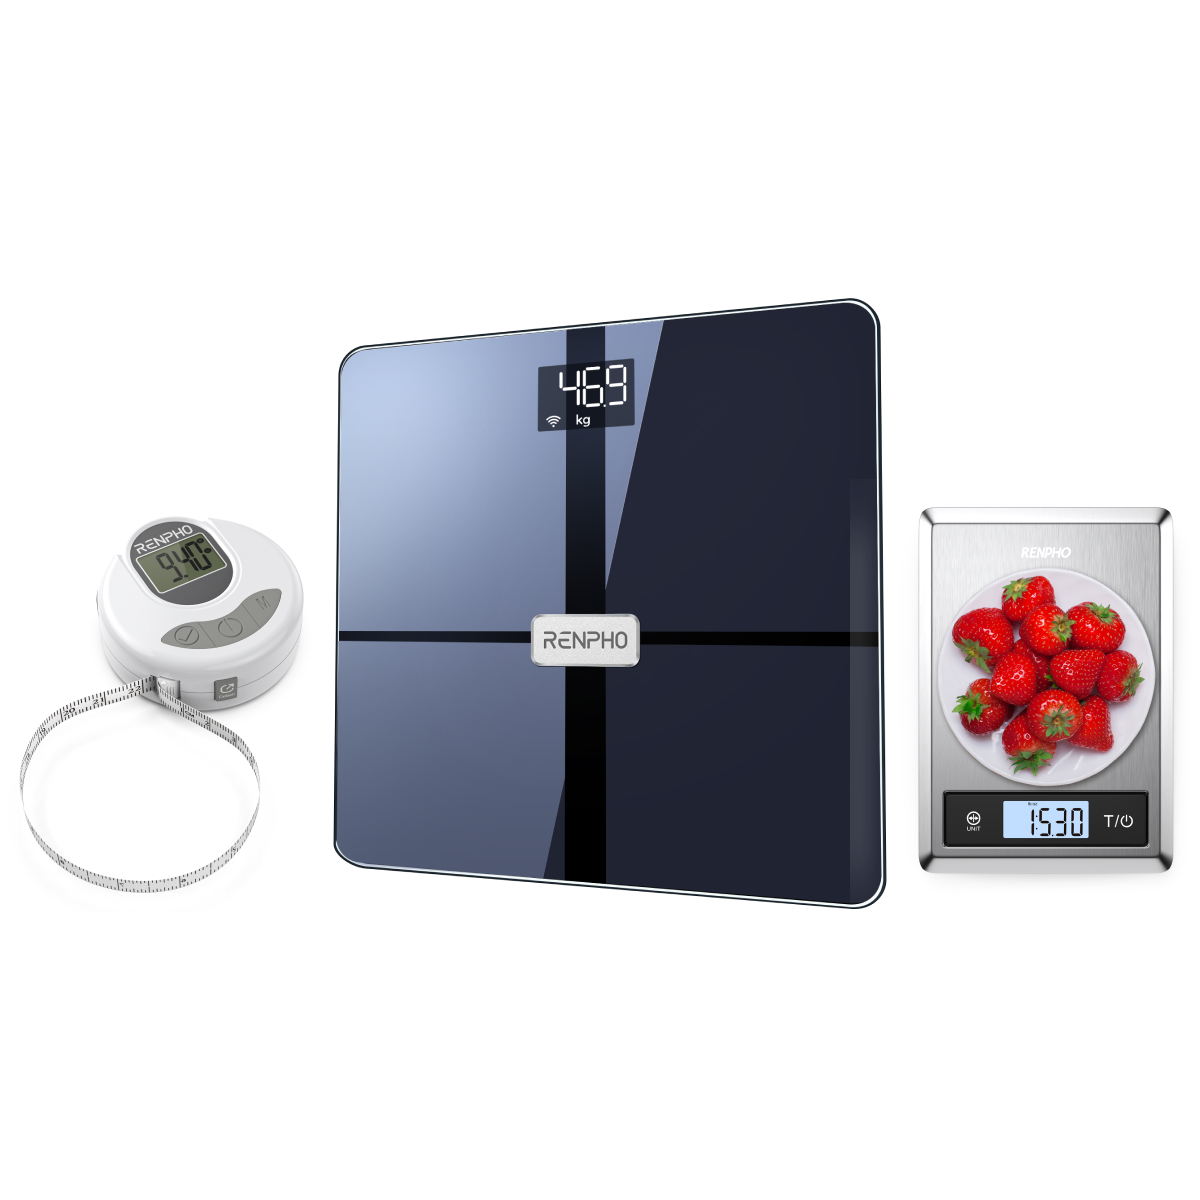 A Renpho CA Health Bundle consisting of a Smart Body Scale showing 46.9 kg, a Smart Tape Measure displaying 37, and a Smart Nutrition Scale with strawberries marked at 1530 grams.